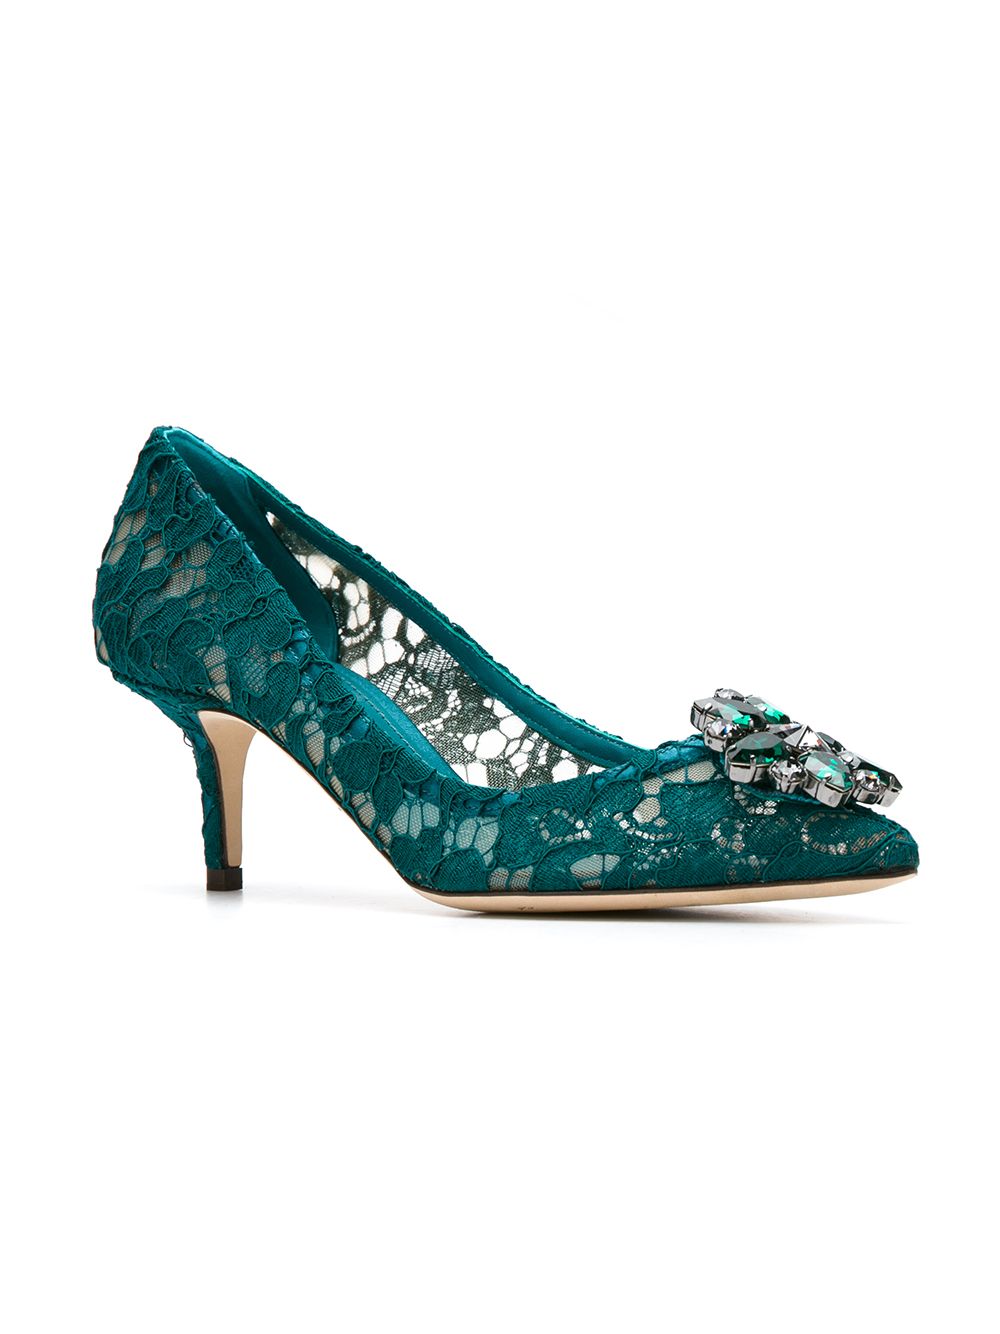  Dolce & Gabbana Lace Pumps With Crystals - Green 